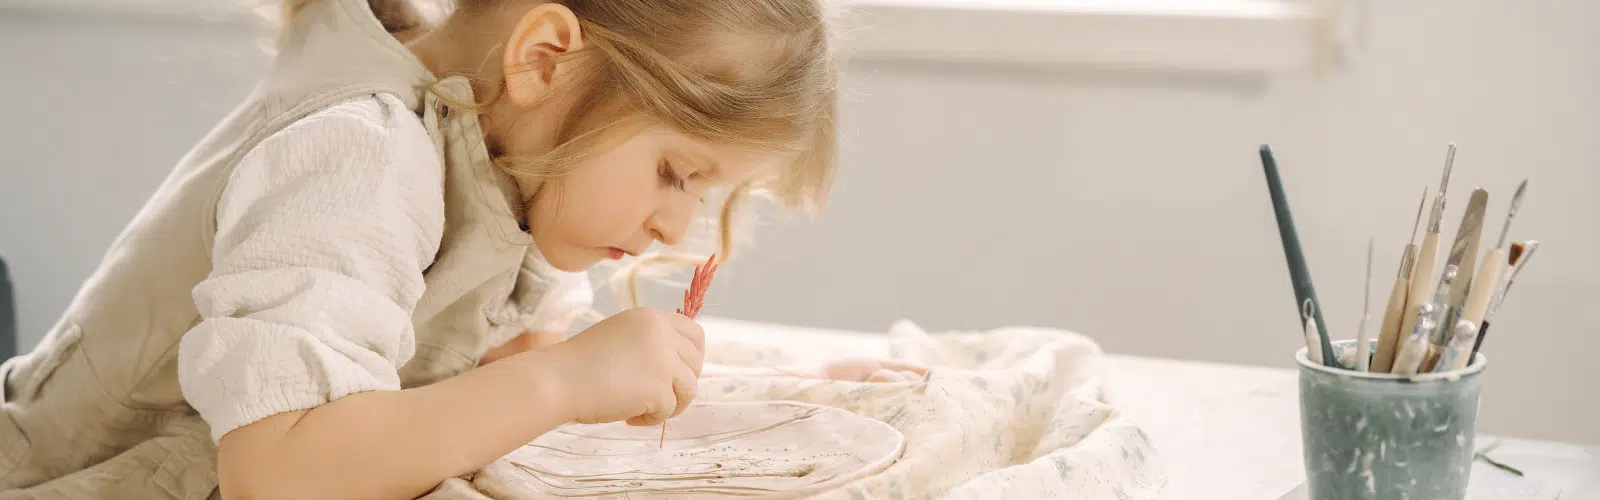 Activity for children 6 years and older: introduction to pottery